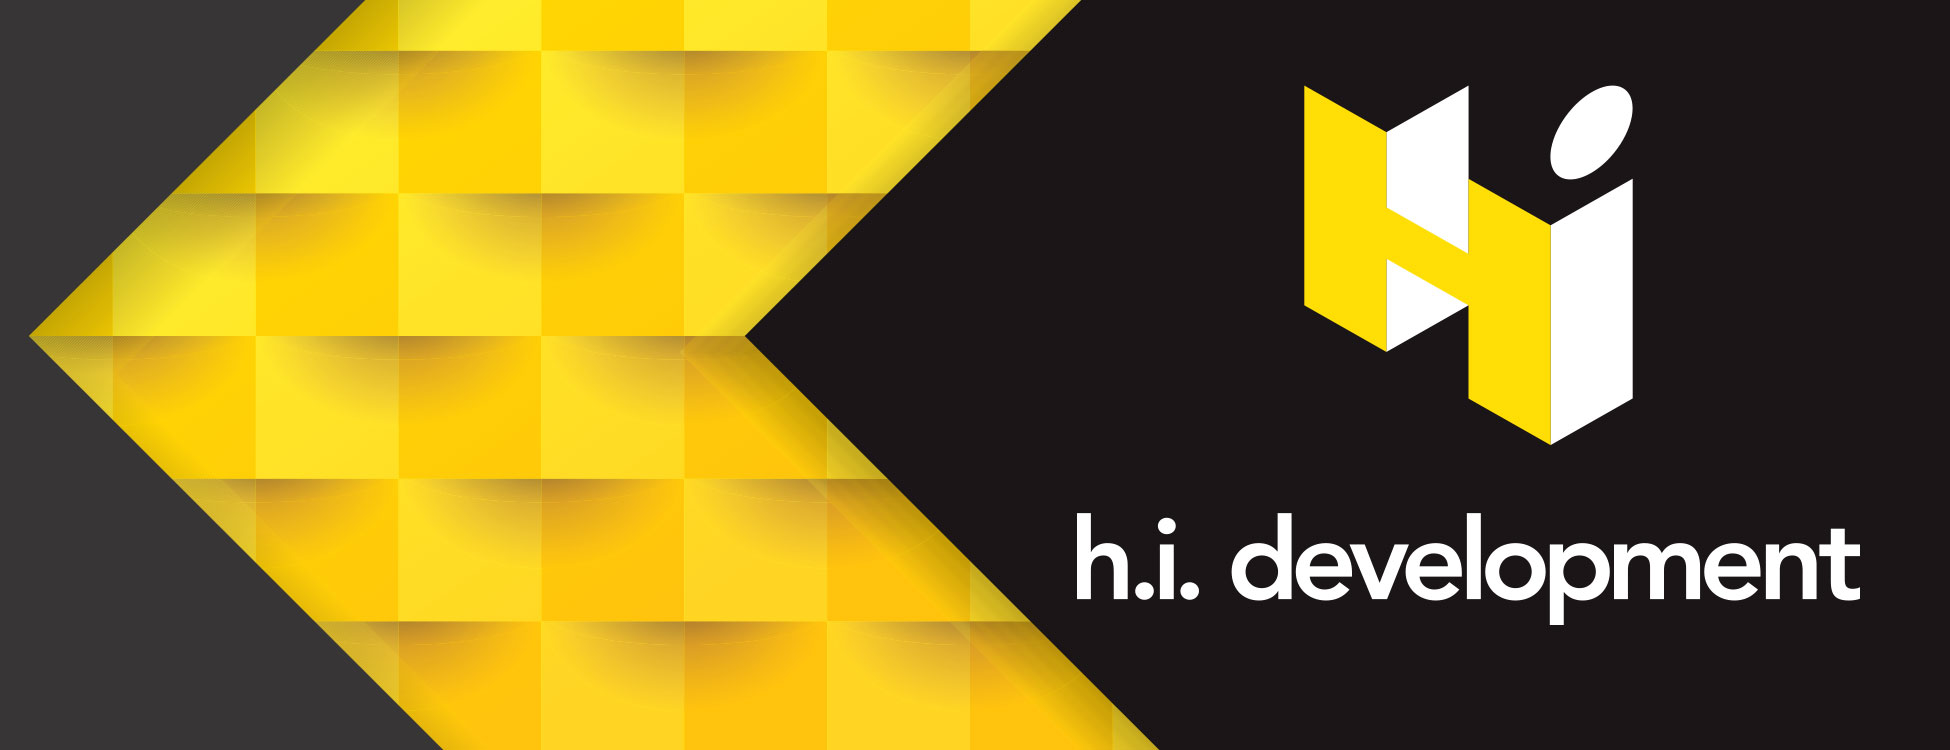 h.i. development logo and abstract yellow black background